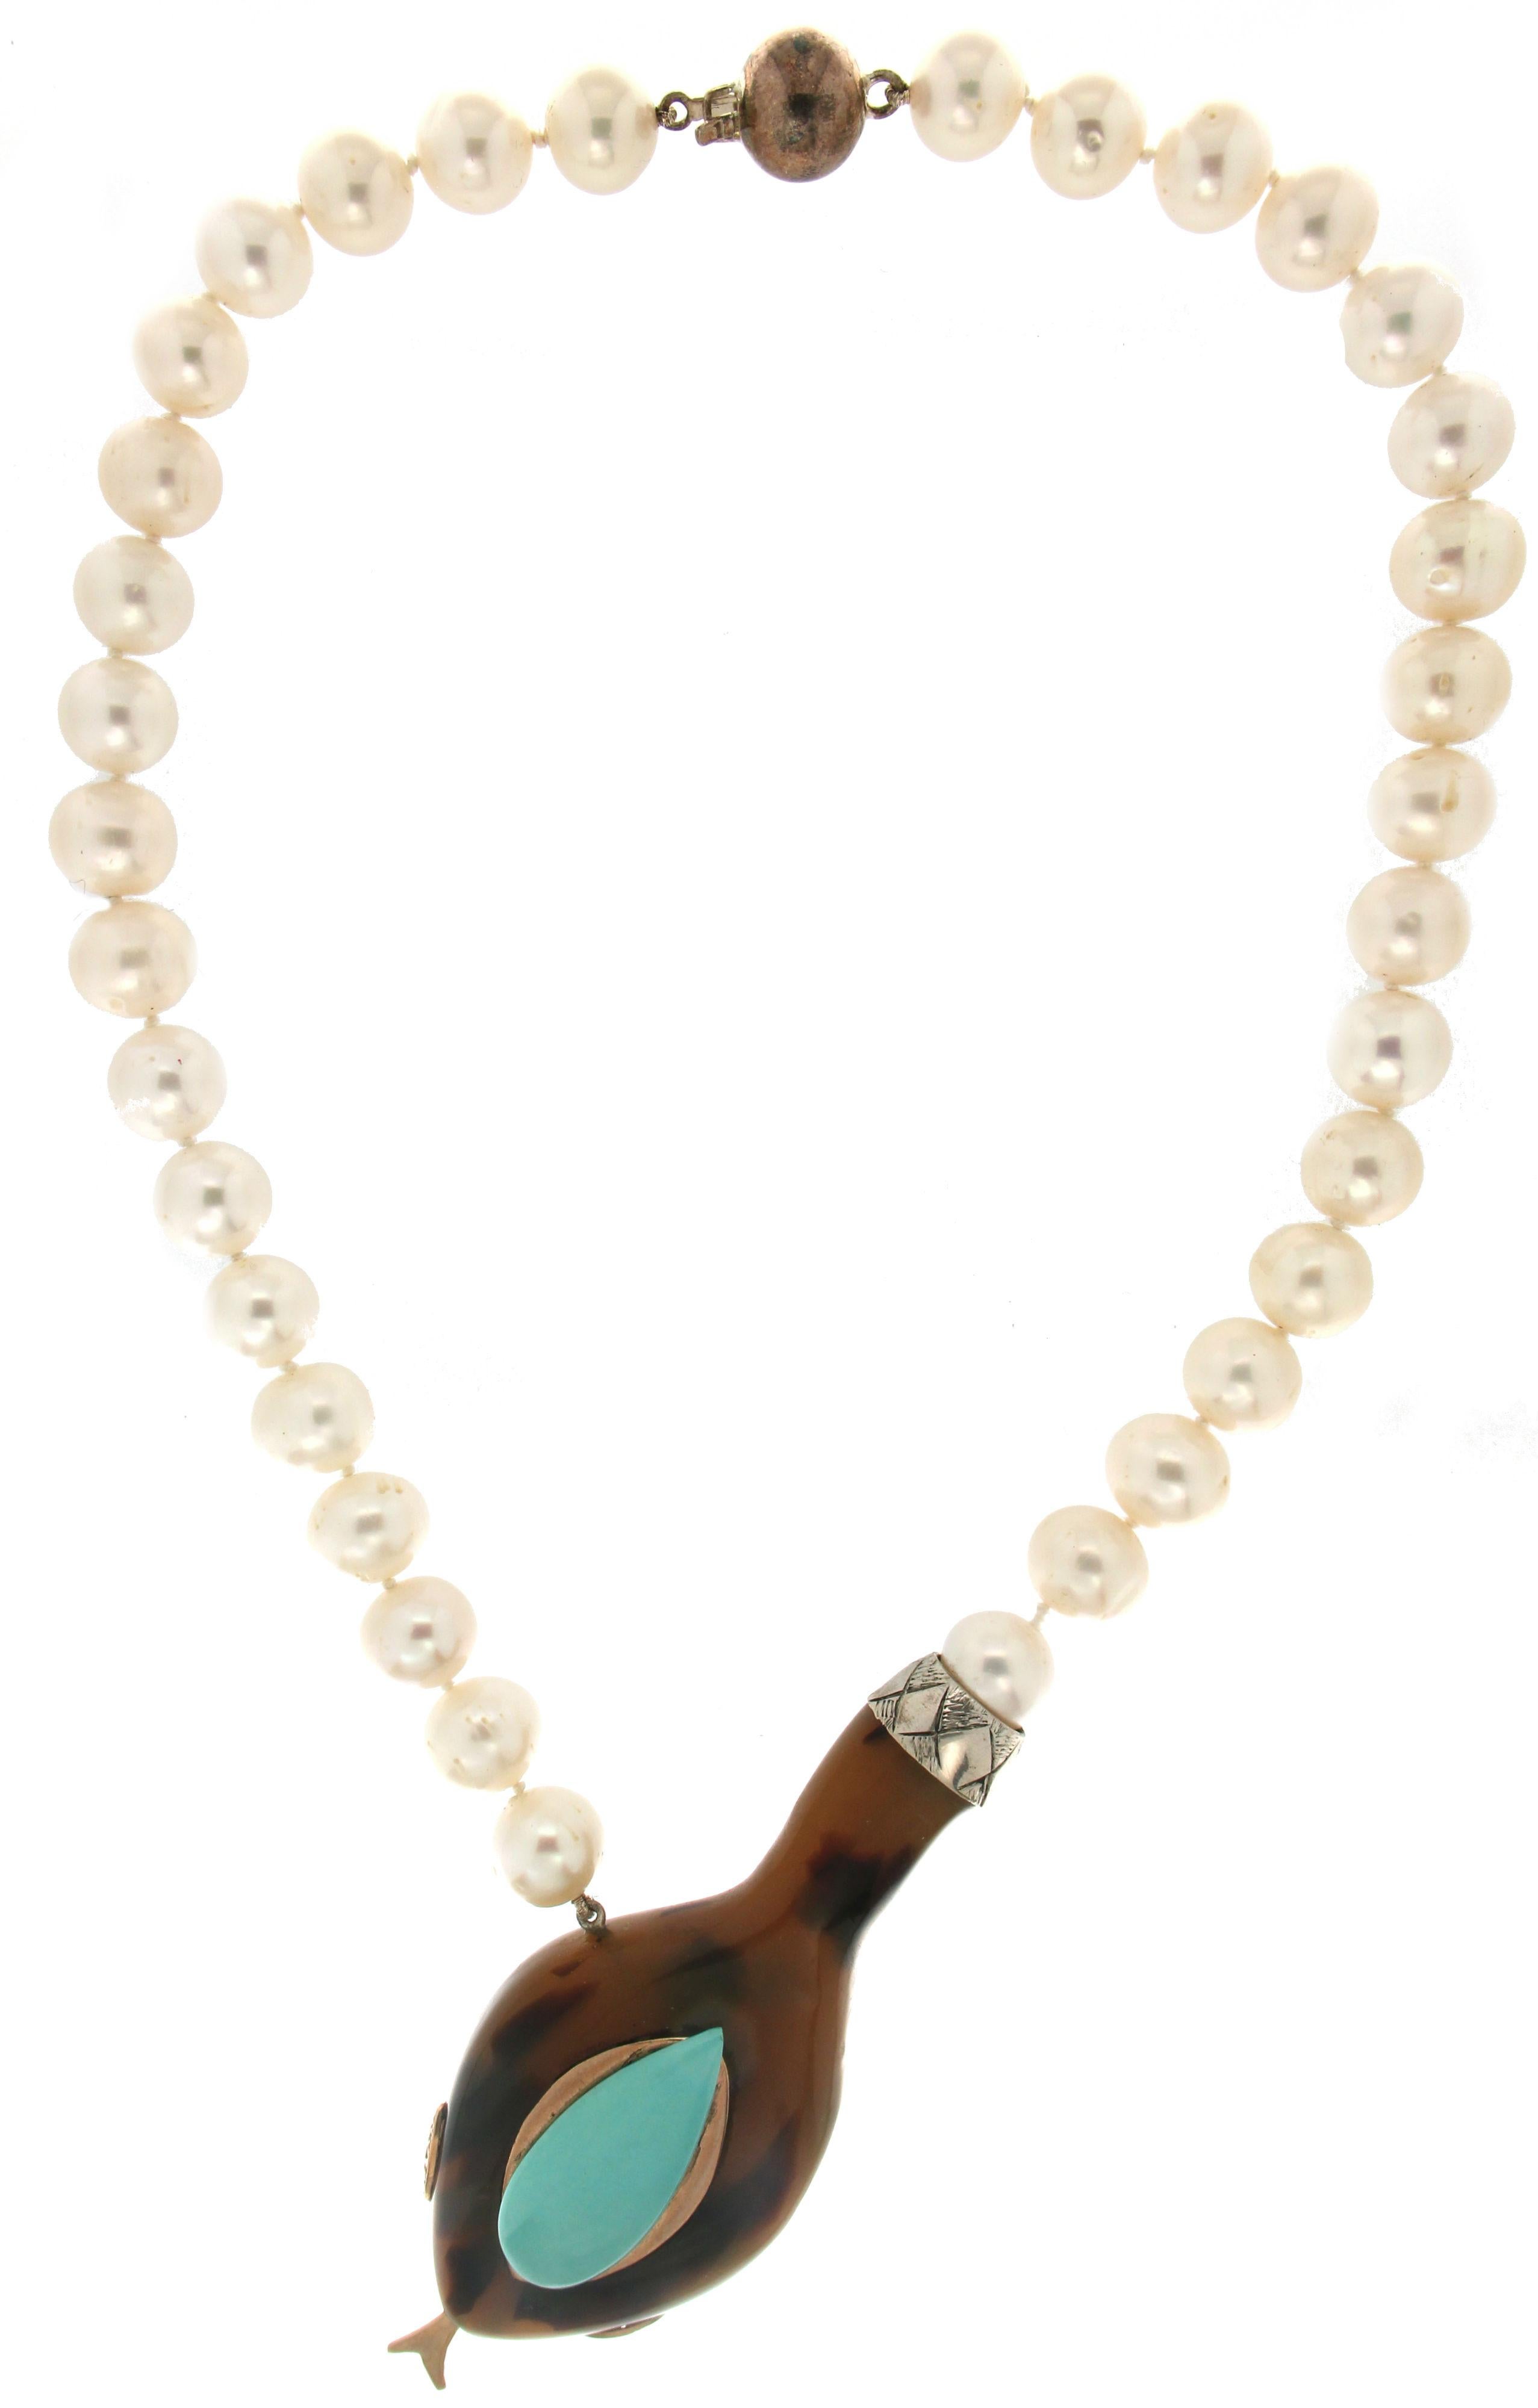 Artisan Handcraft Galalith Snake 9 Karat Yellow Diamonds Turquoise Pearls Necklace For Sale